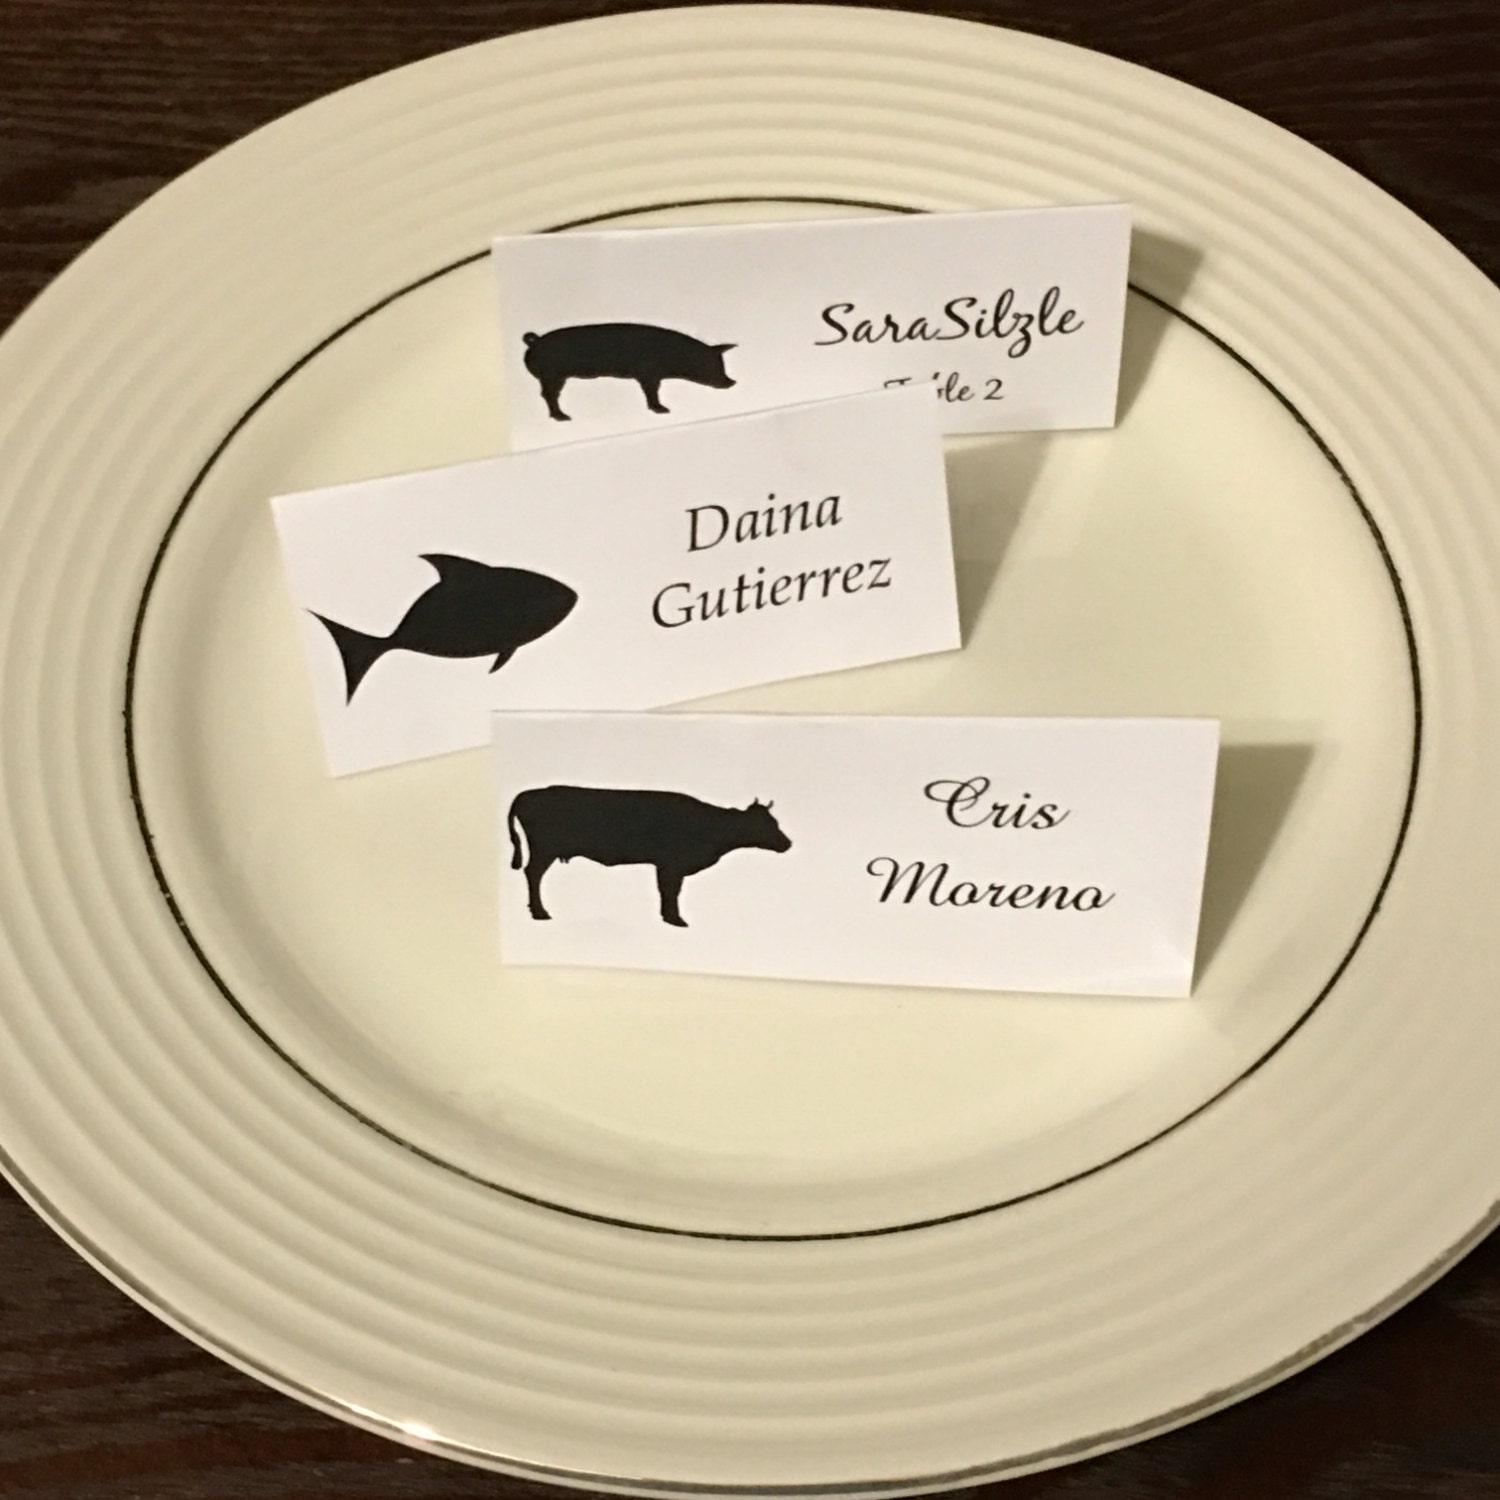 25 Large Meal Choice Selection Place Cards / by Tidbitdesigns